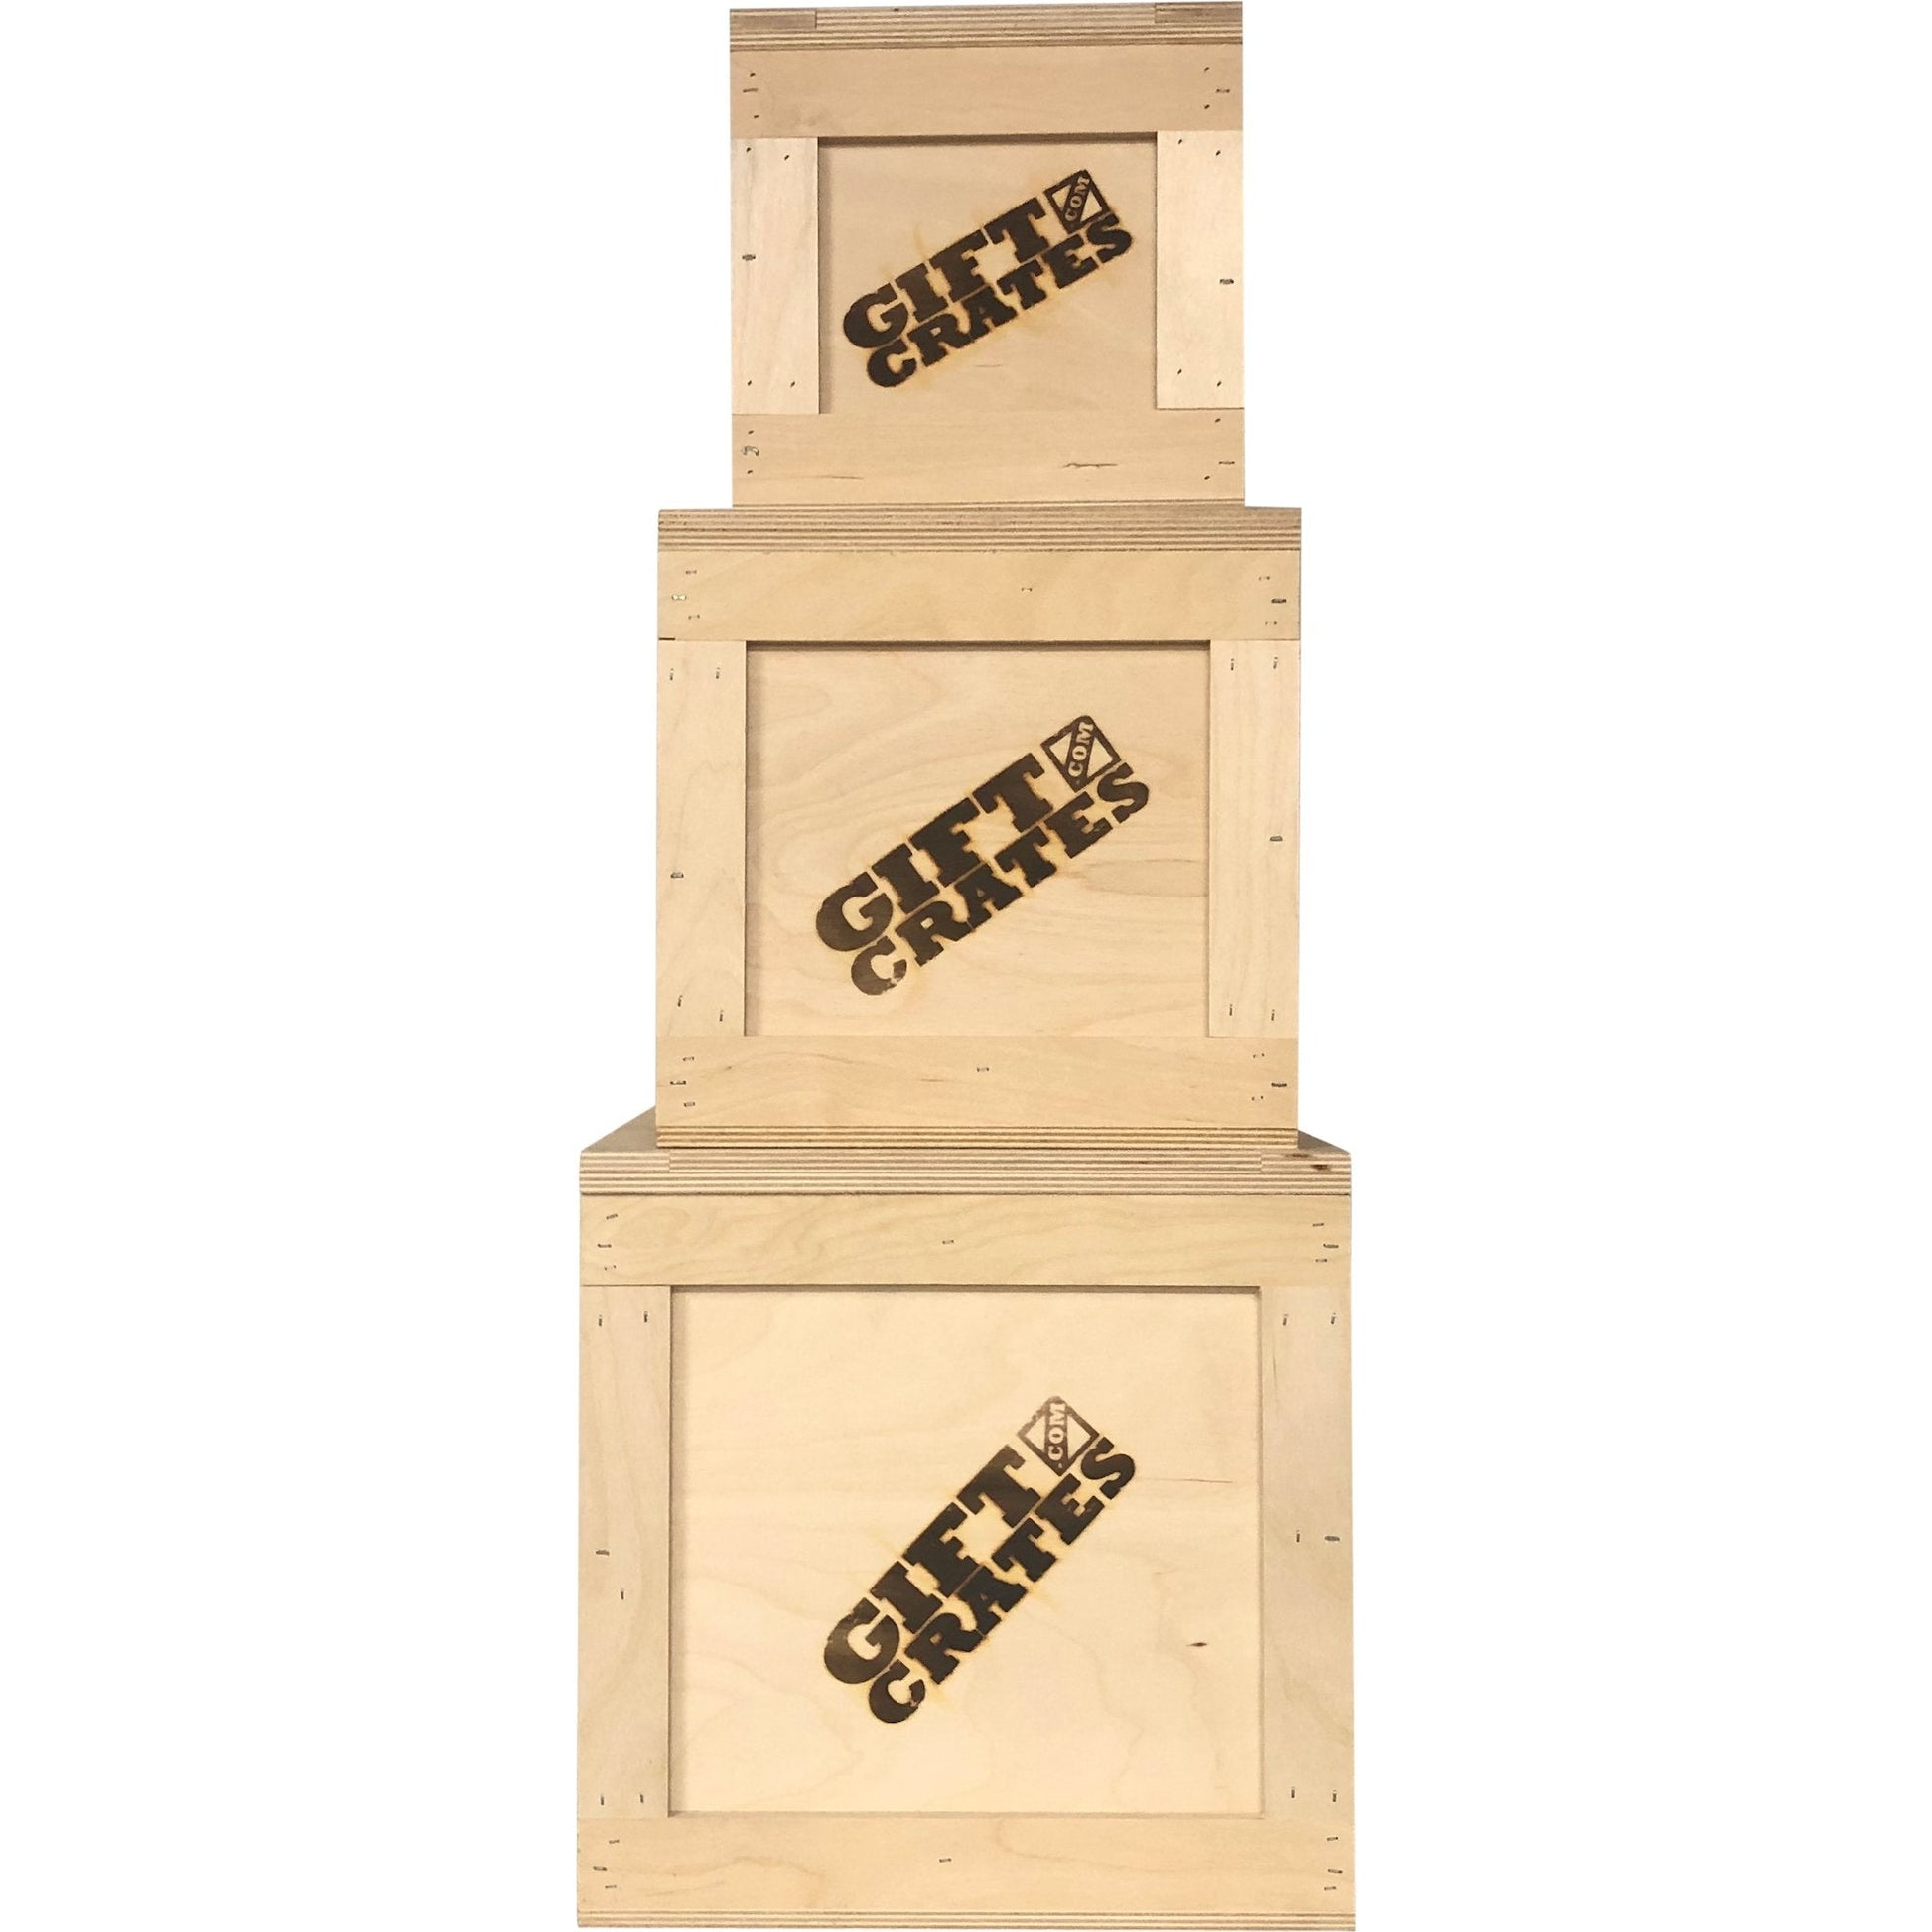 Fifteen Inch Wooden Crate - Gift Crates